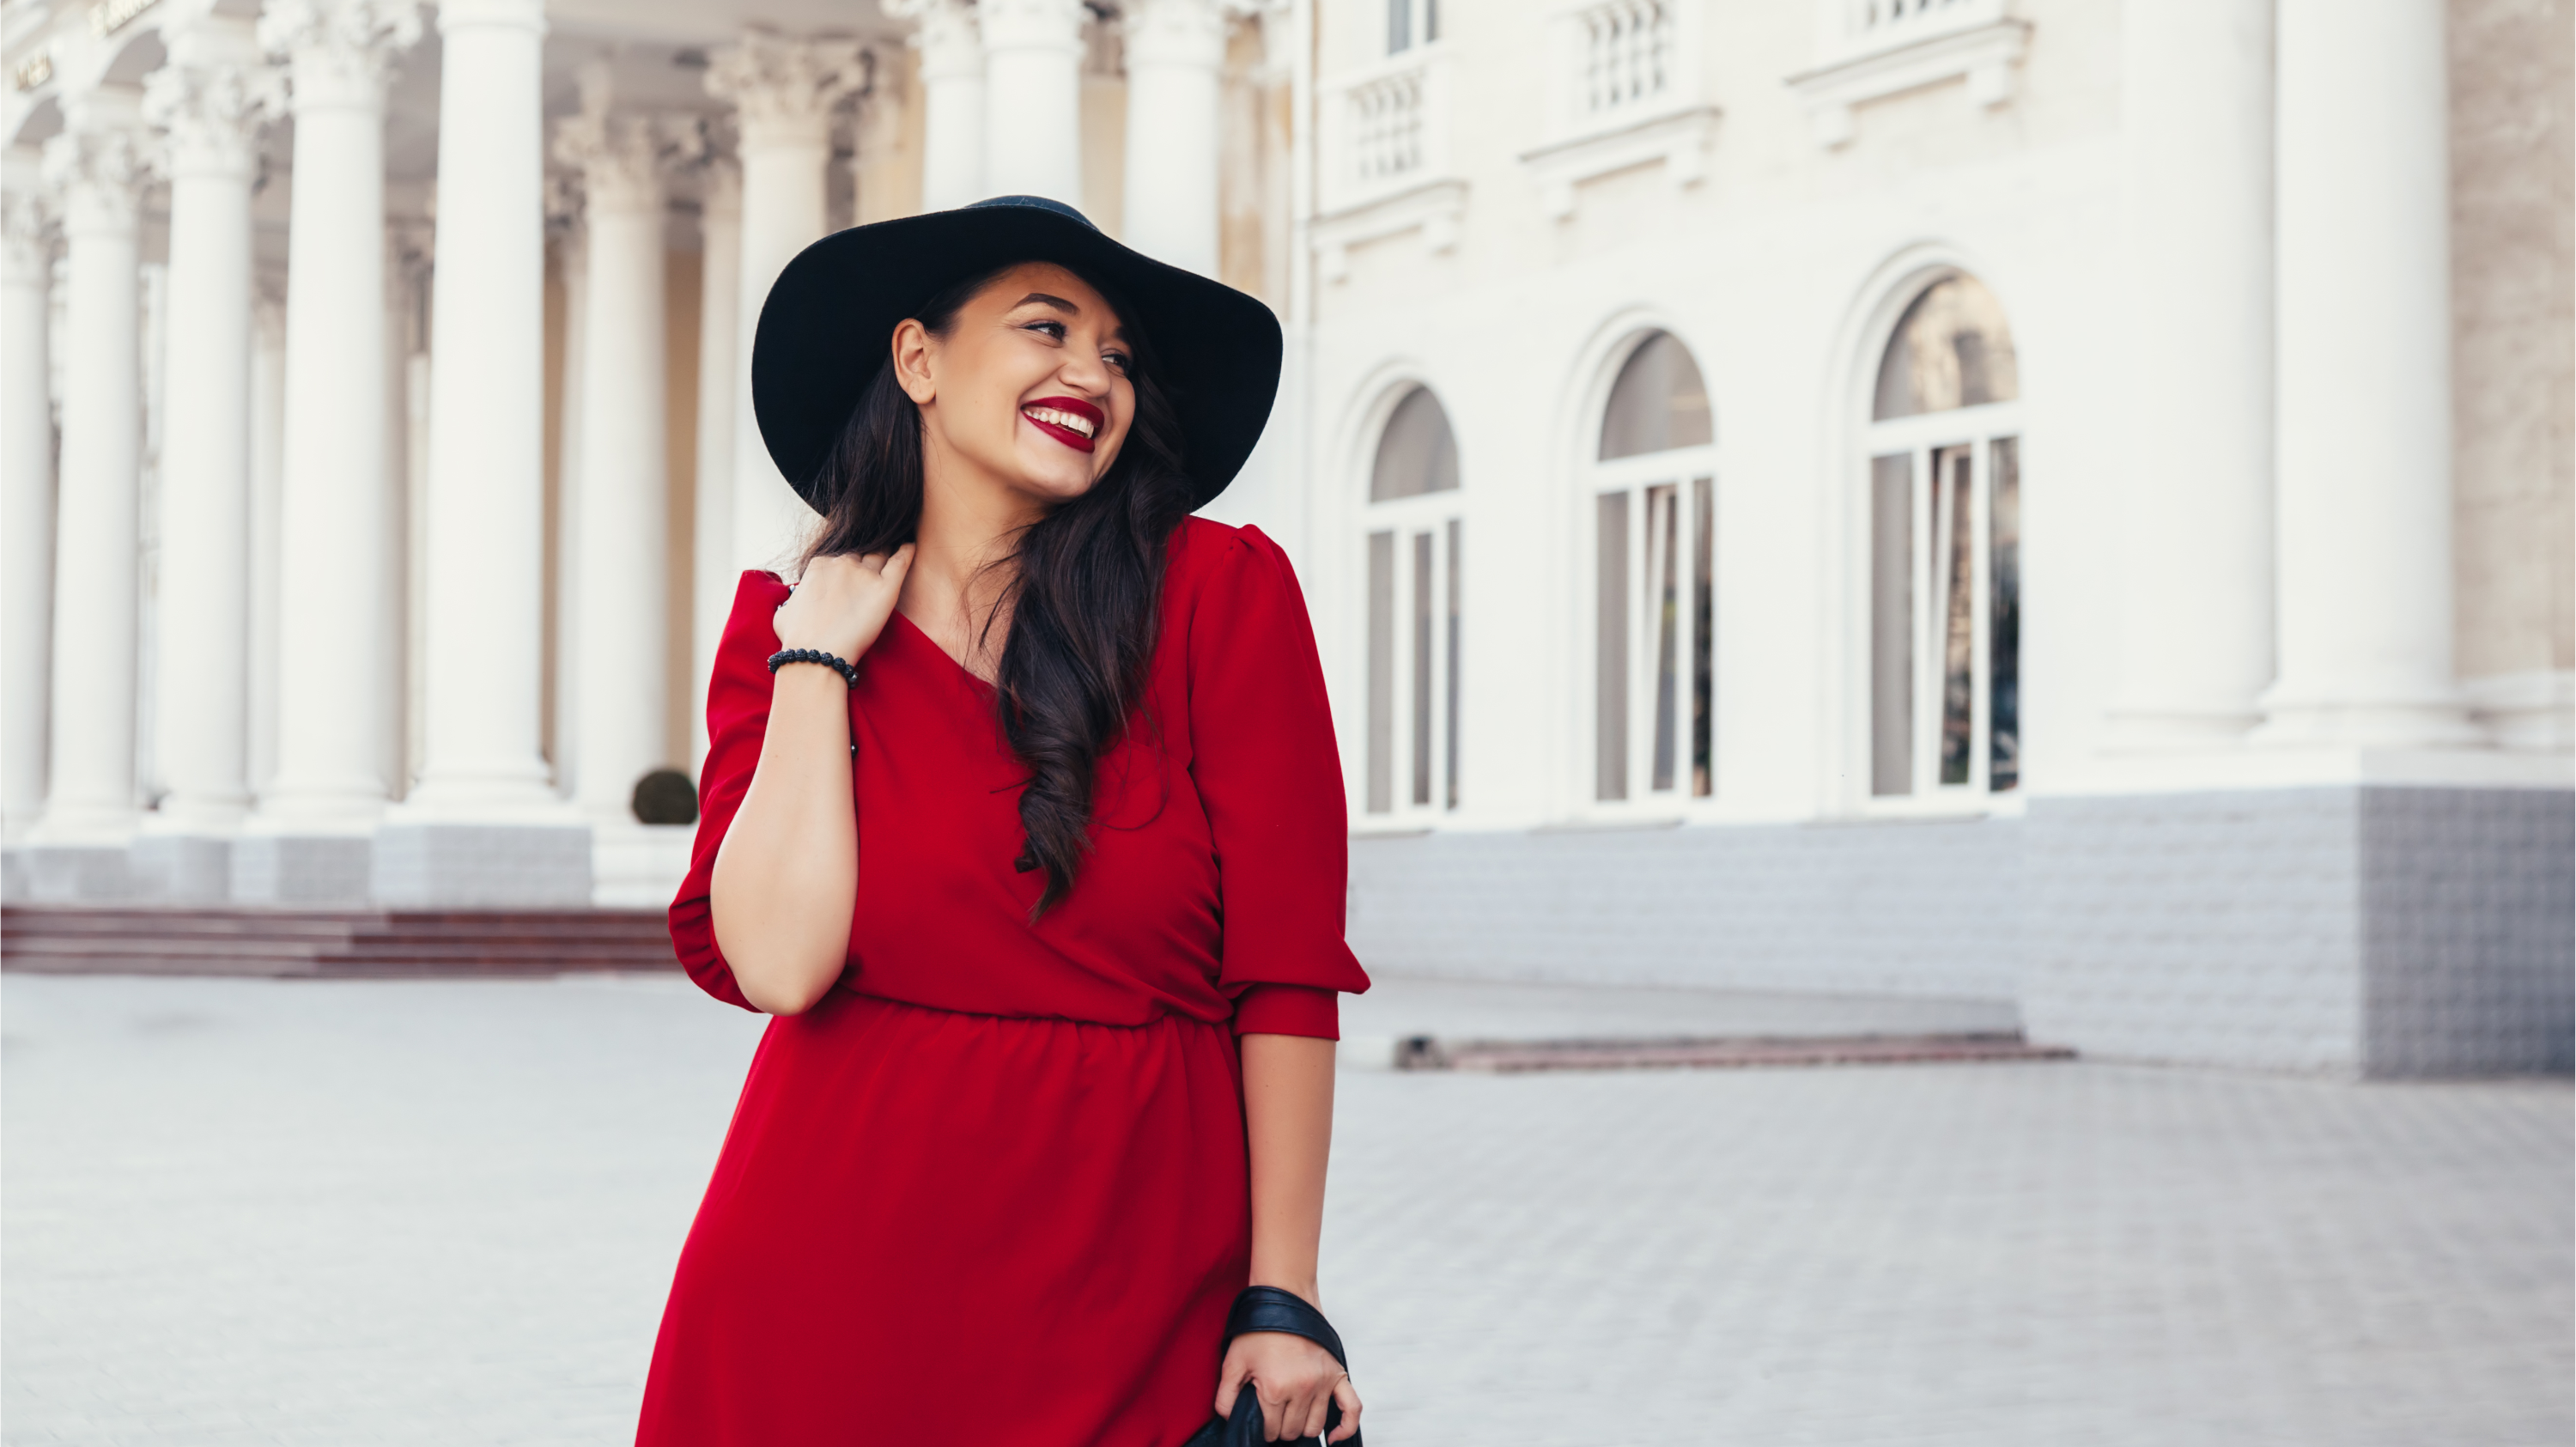 Plus Size Fashion: 10 Outfit Ideas to Look and Feel Your Best